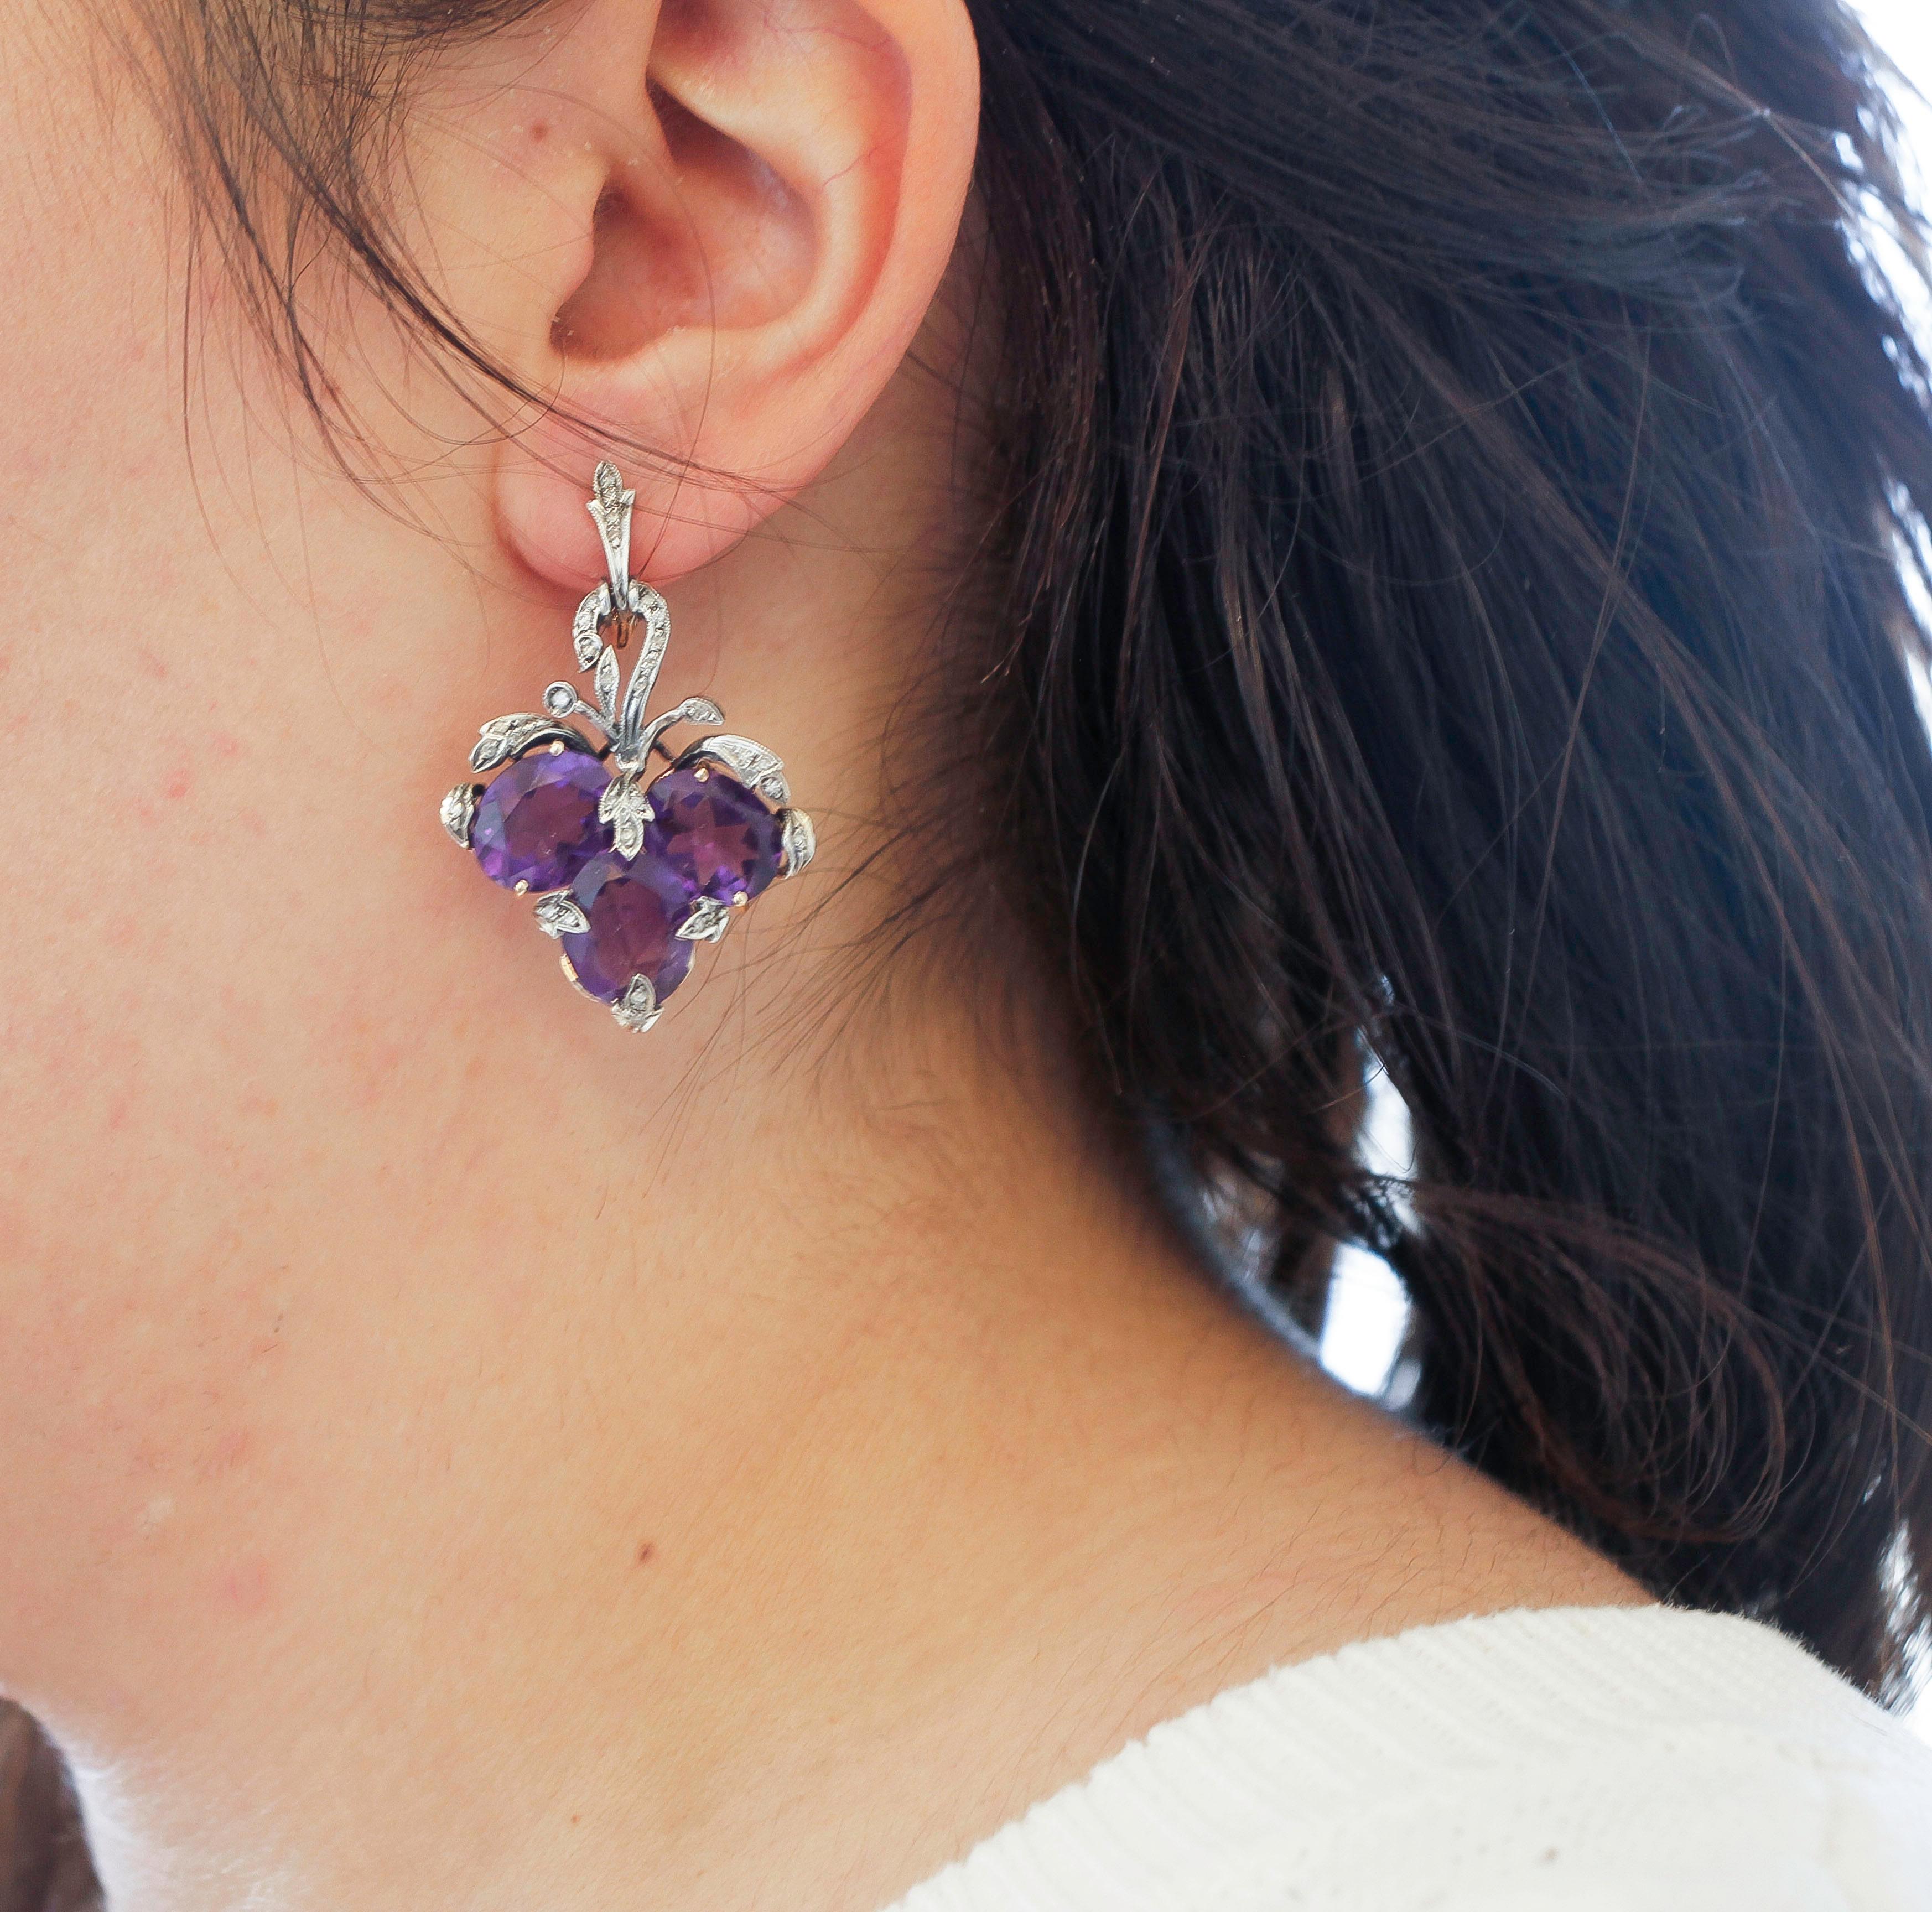 Mixed Cut Little Diamonds, Amethysts, Rose Gold and Silver Level Back/Dangle Earrings